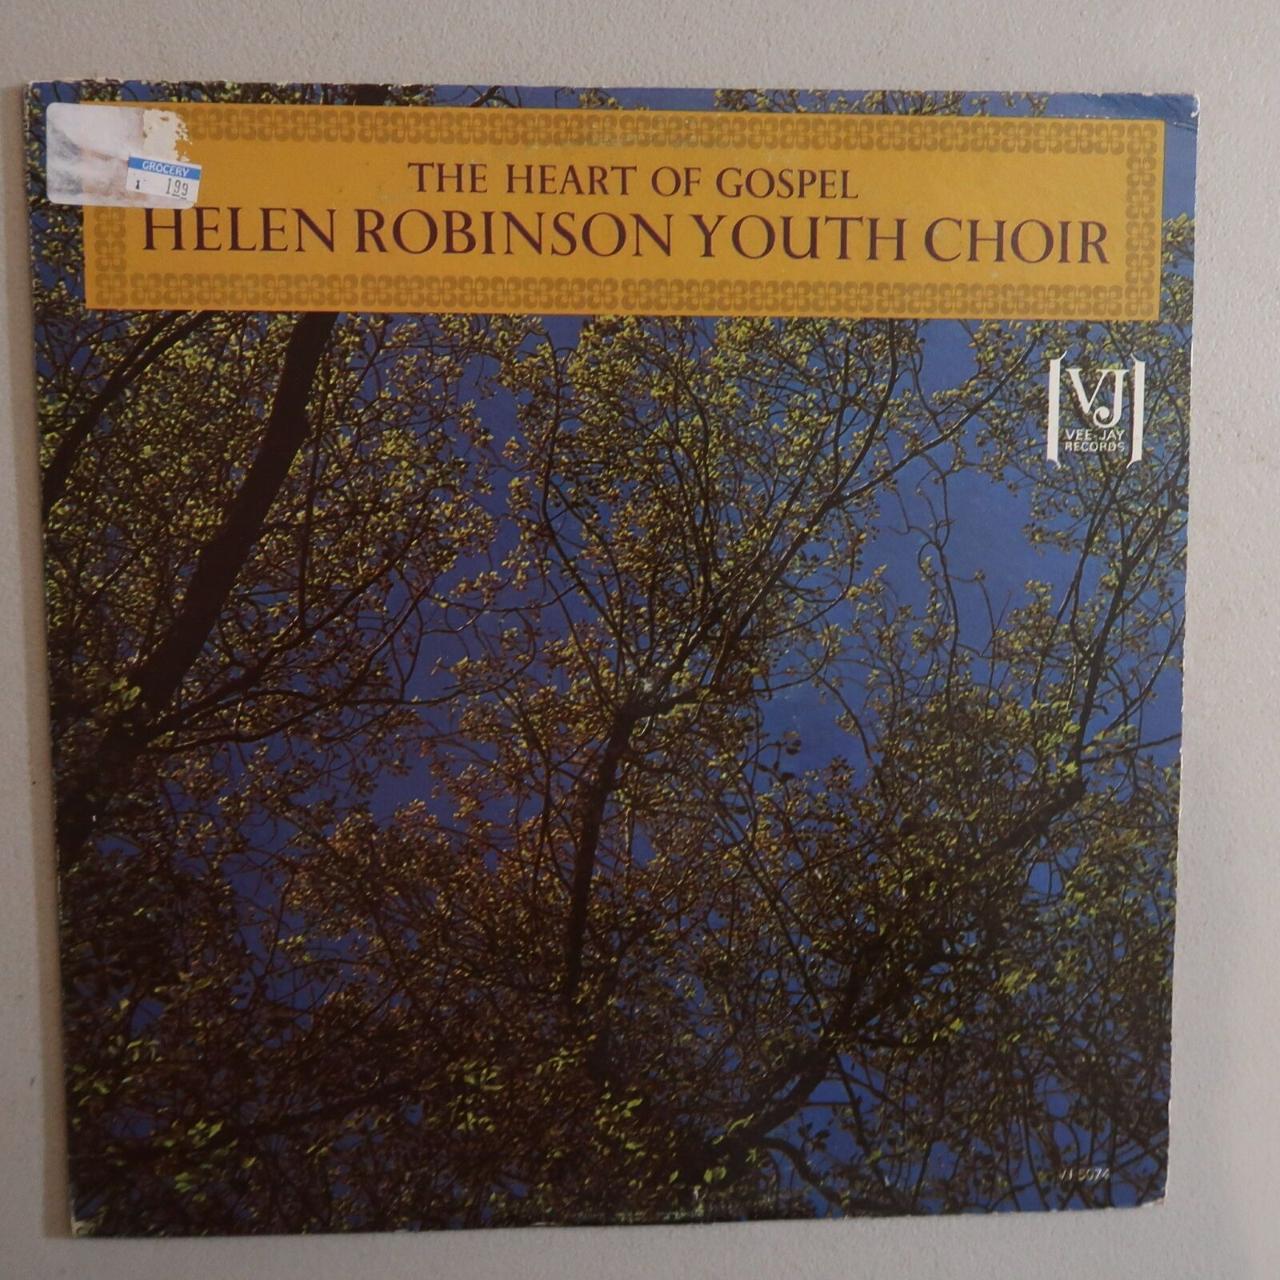 Product Image 1 - HELEN ROBINSON YOUTH CHOIR THE